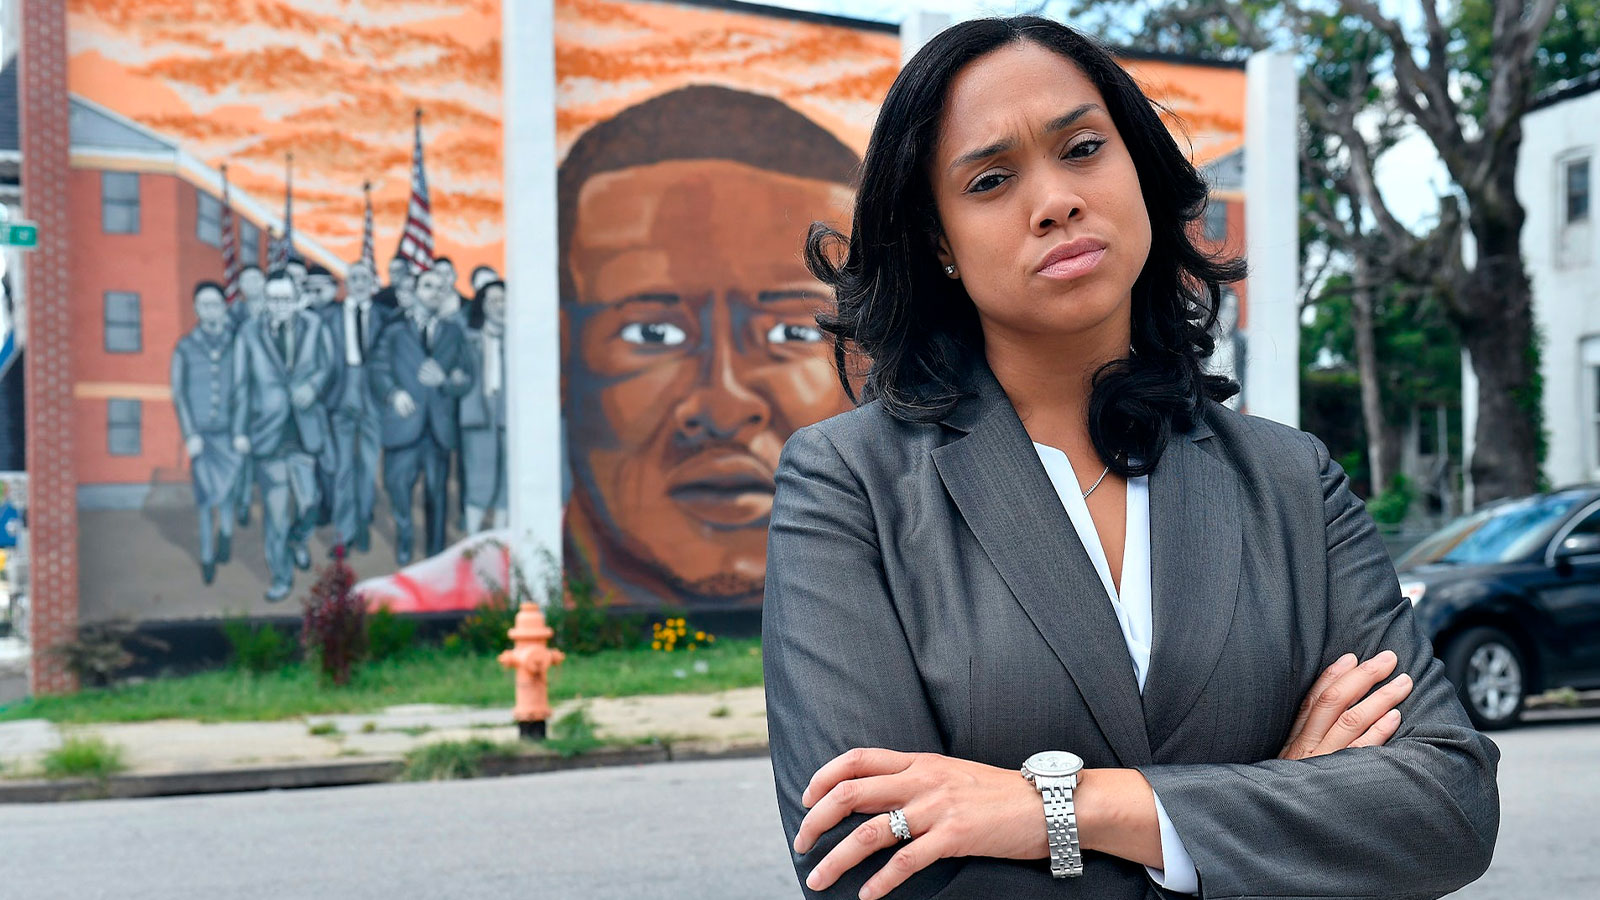 State’s attorney for Baltimore, Md., Marilyn J. Mosby answers media questions on Aug. 24, 2016.